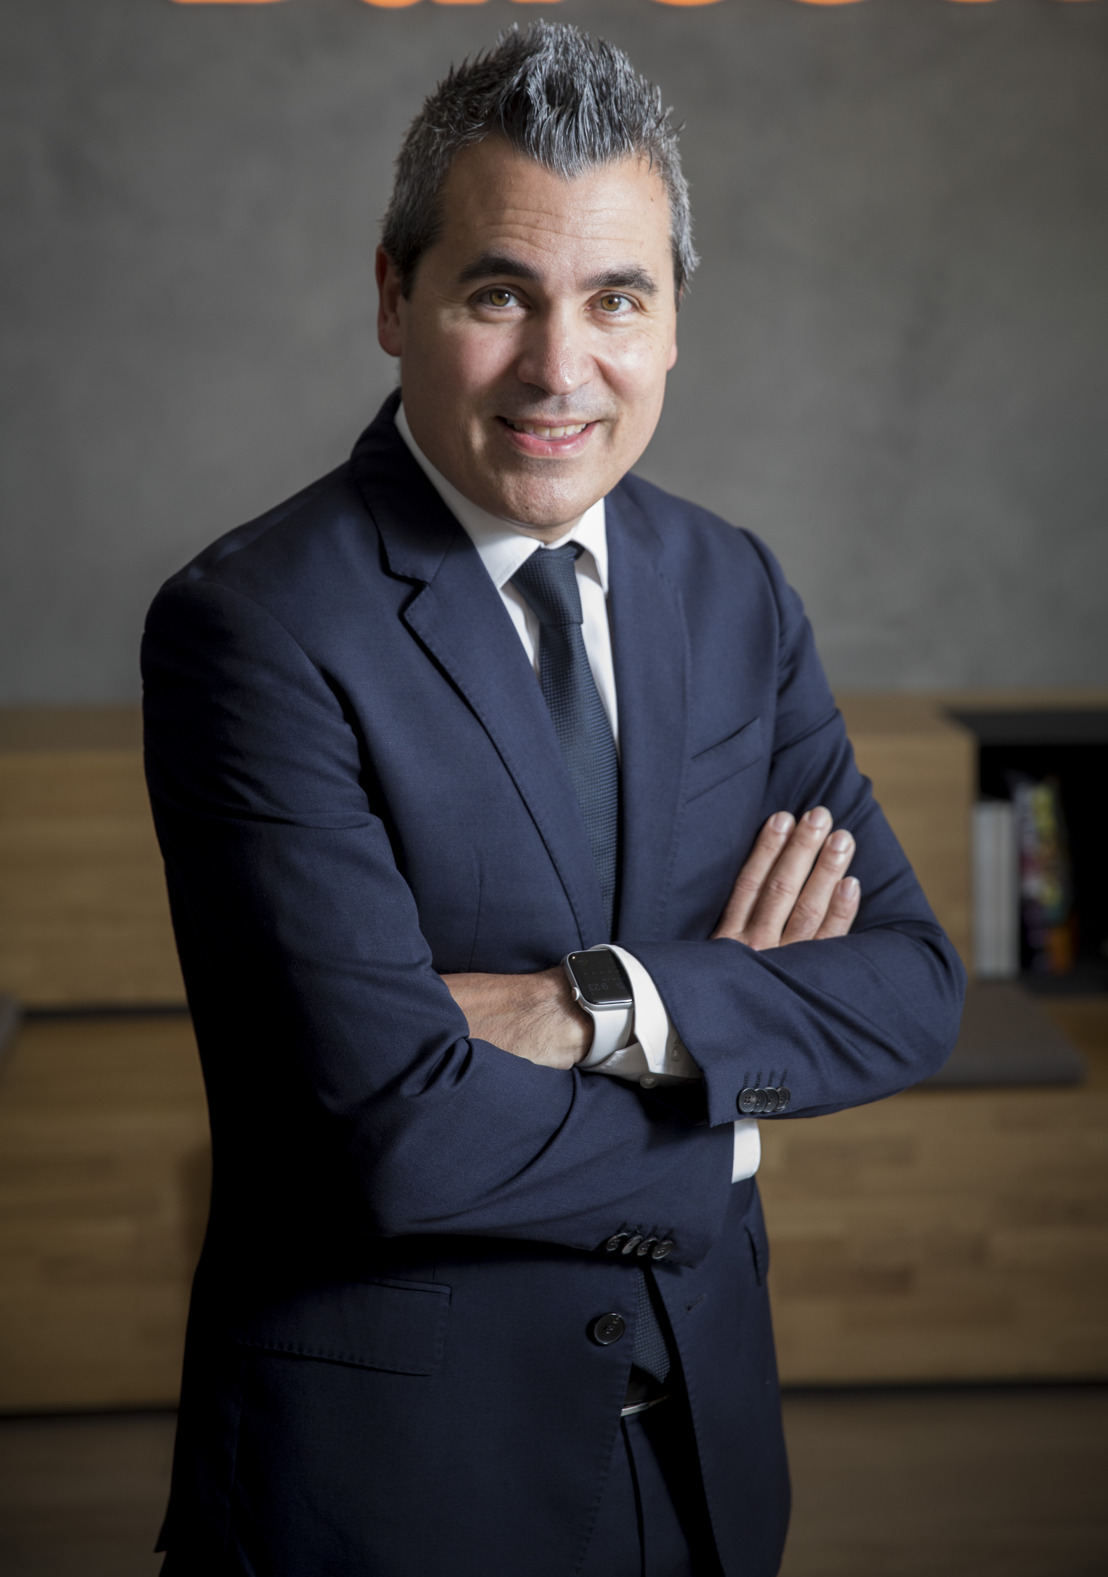 SEAT names Josep Maria Recasens new Director of Strategy and Institutional Relations